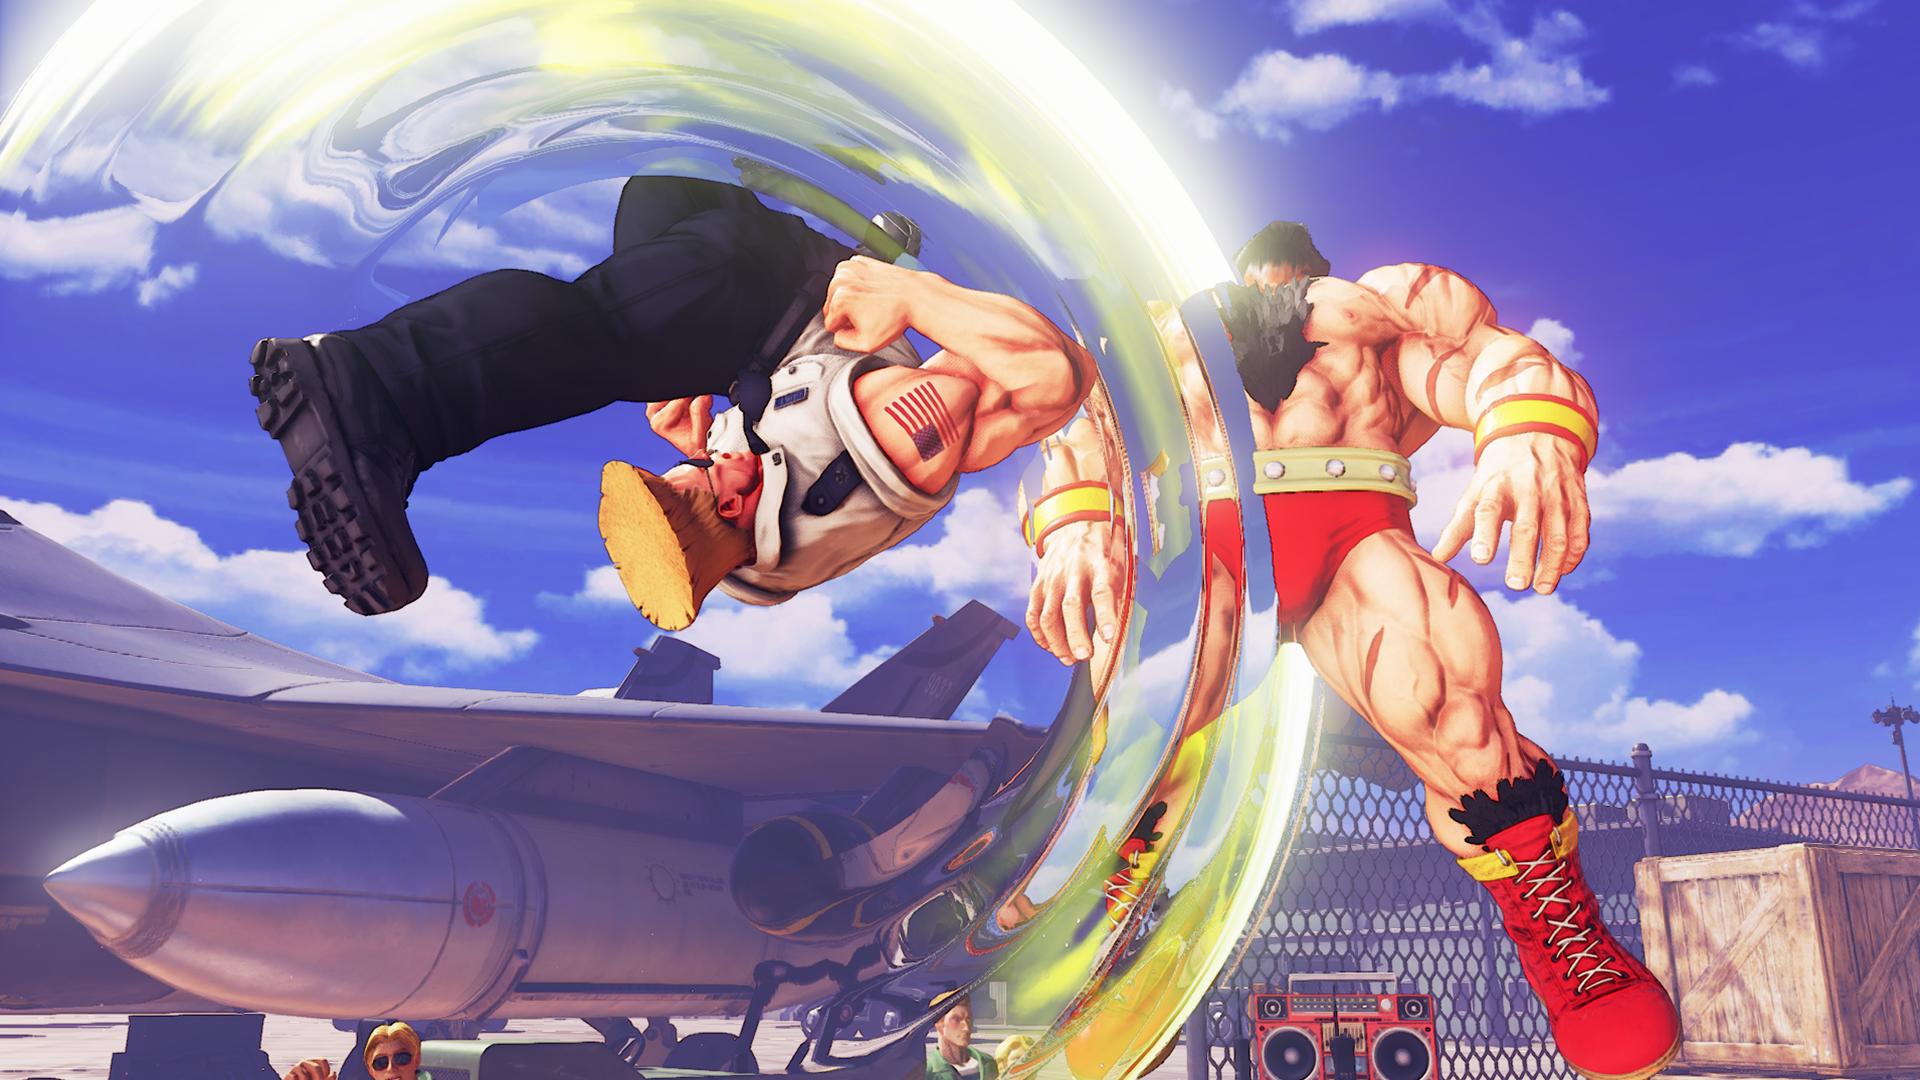 “Street Fighter V’s” Guile Release Date Revealed - Sonic Boom on April 28